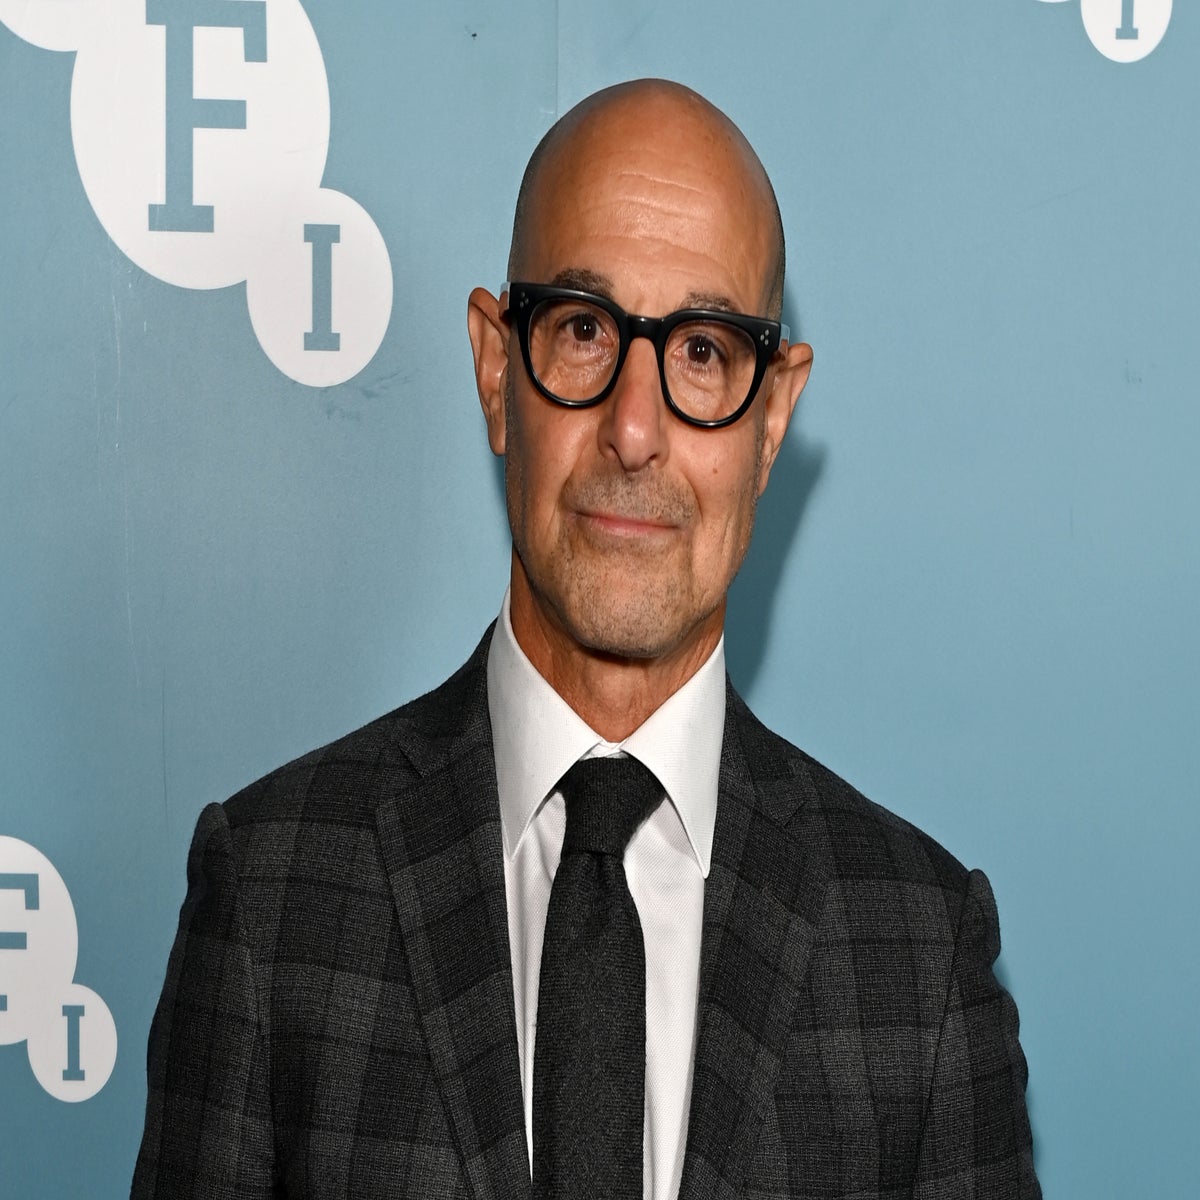 Stanley Tucci: Searching for Italy' Canceled by CNN – The Hollywood Reporter